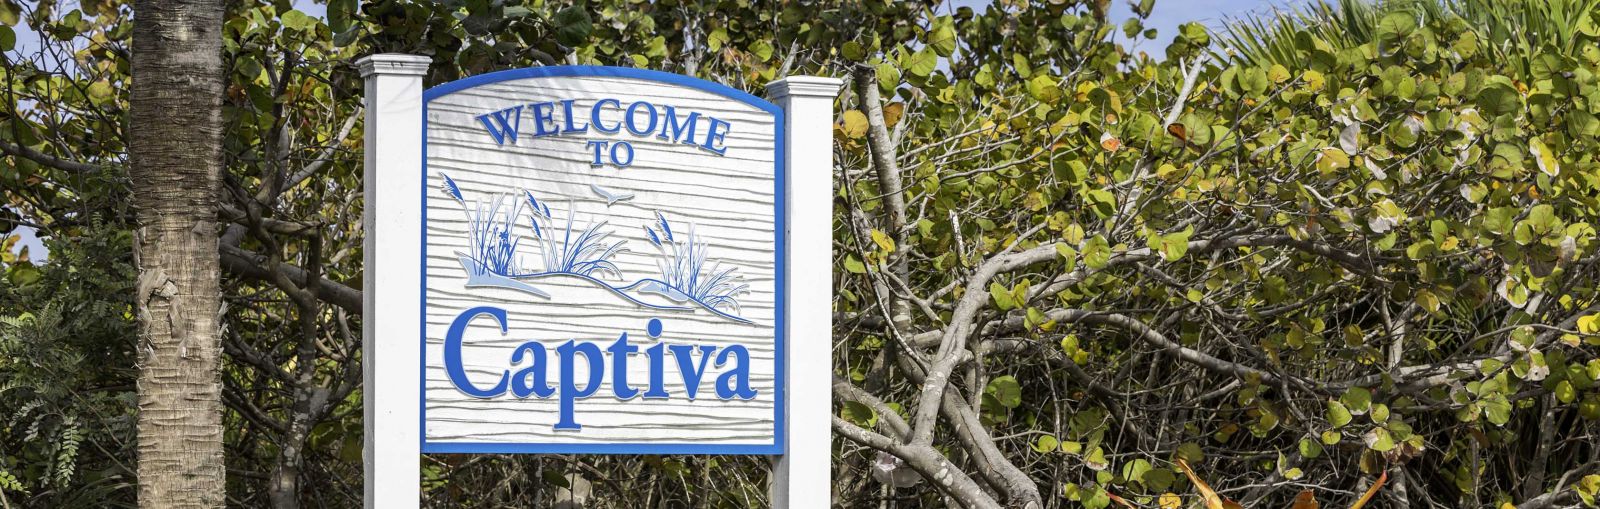 Welcome to Captiva Sign